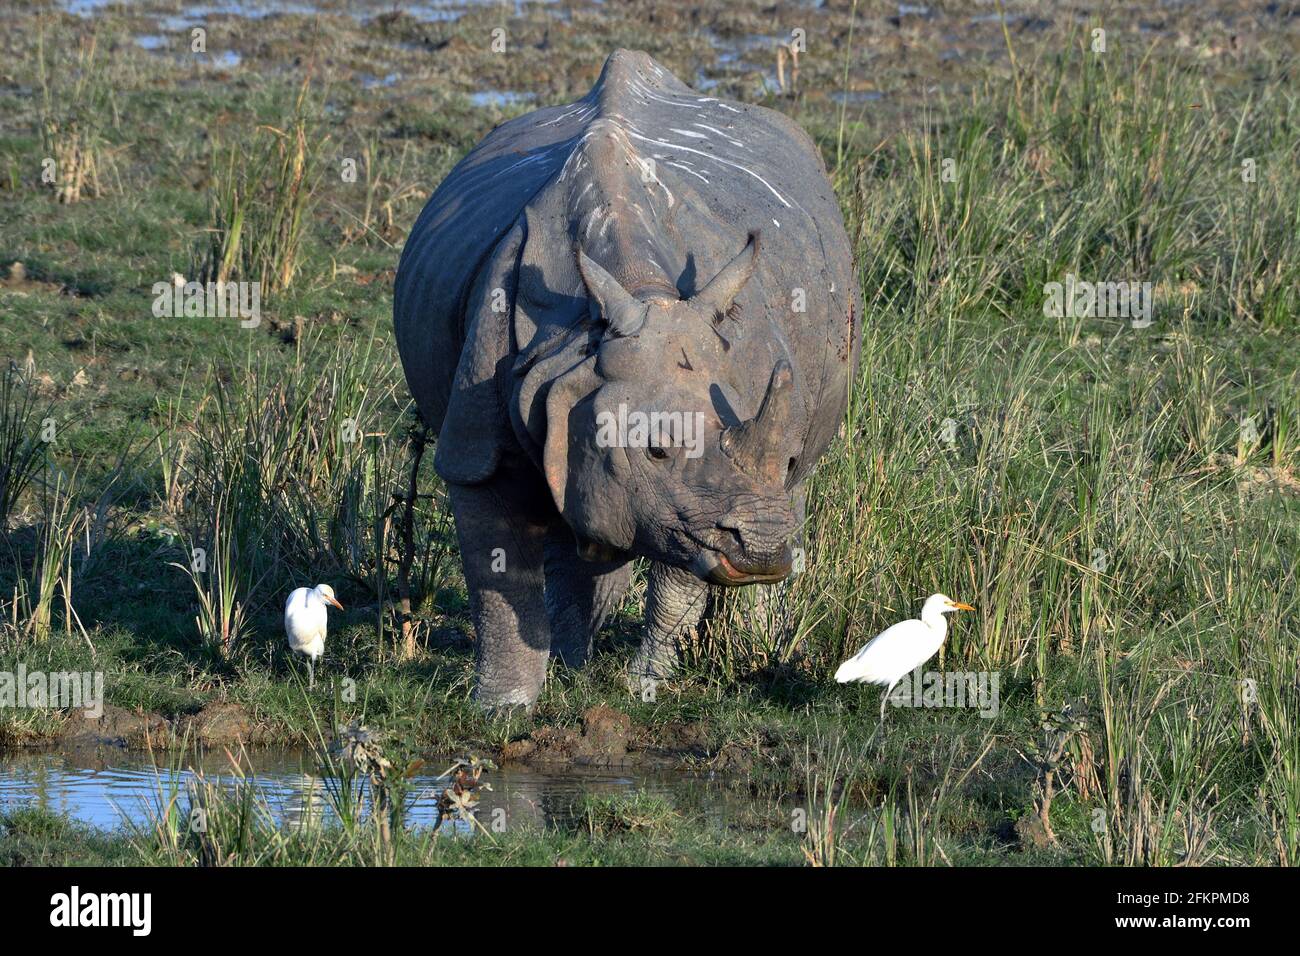 Greater One Horned Rhino Is Drinking Water In The Wetland Stock Photo